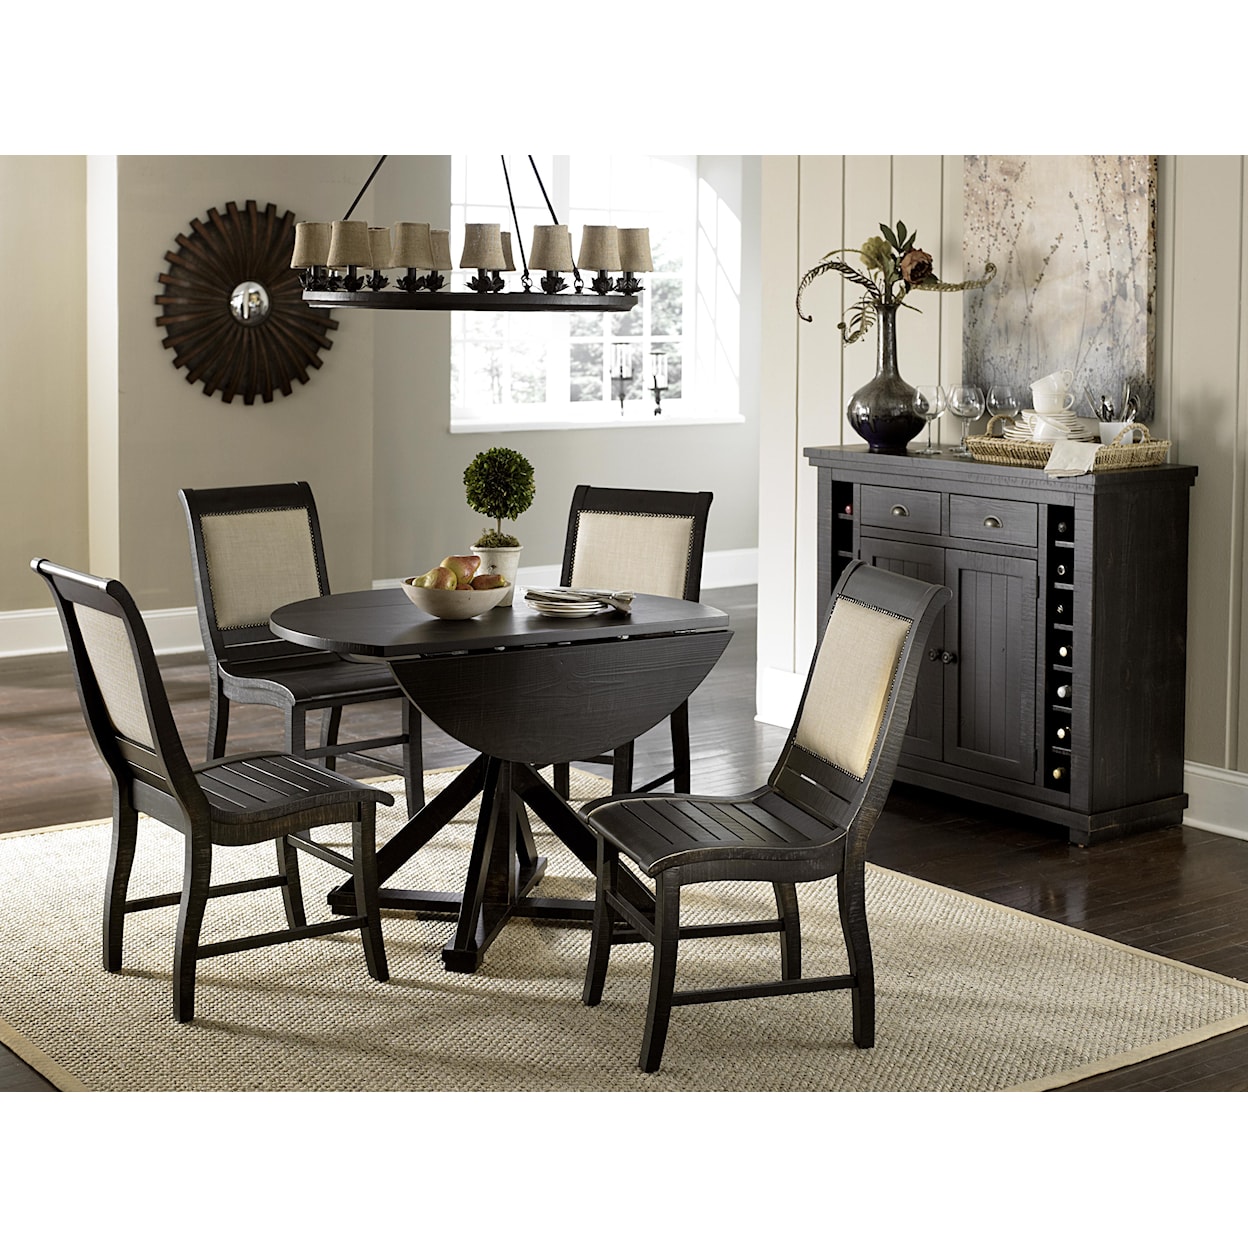 Carolina Chairs Willow Dining Casual Dining Room Group